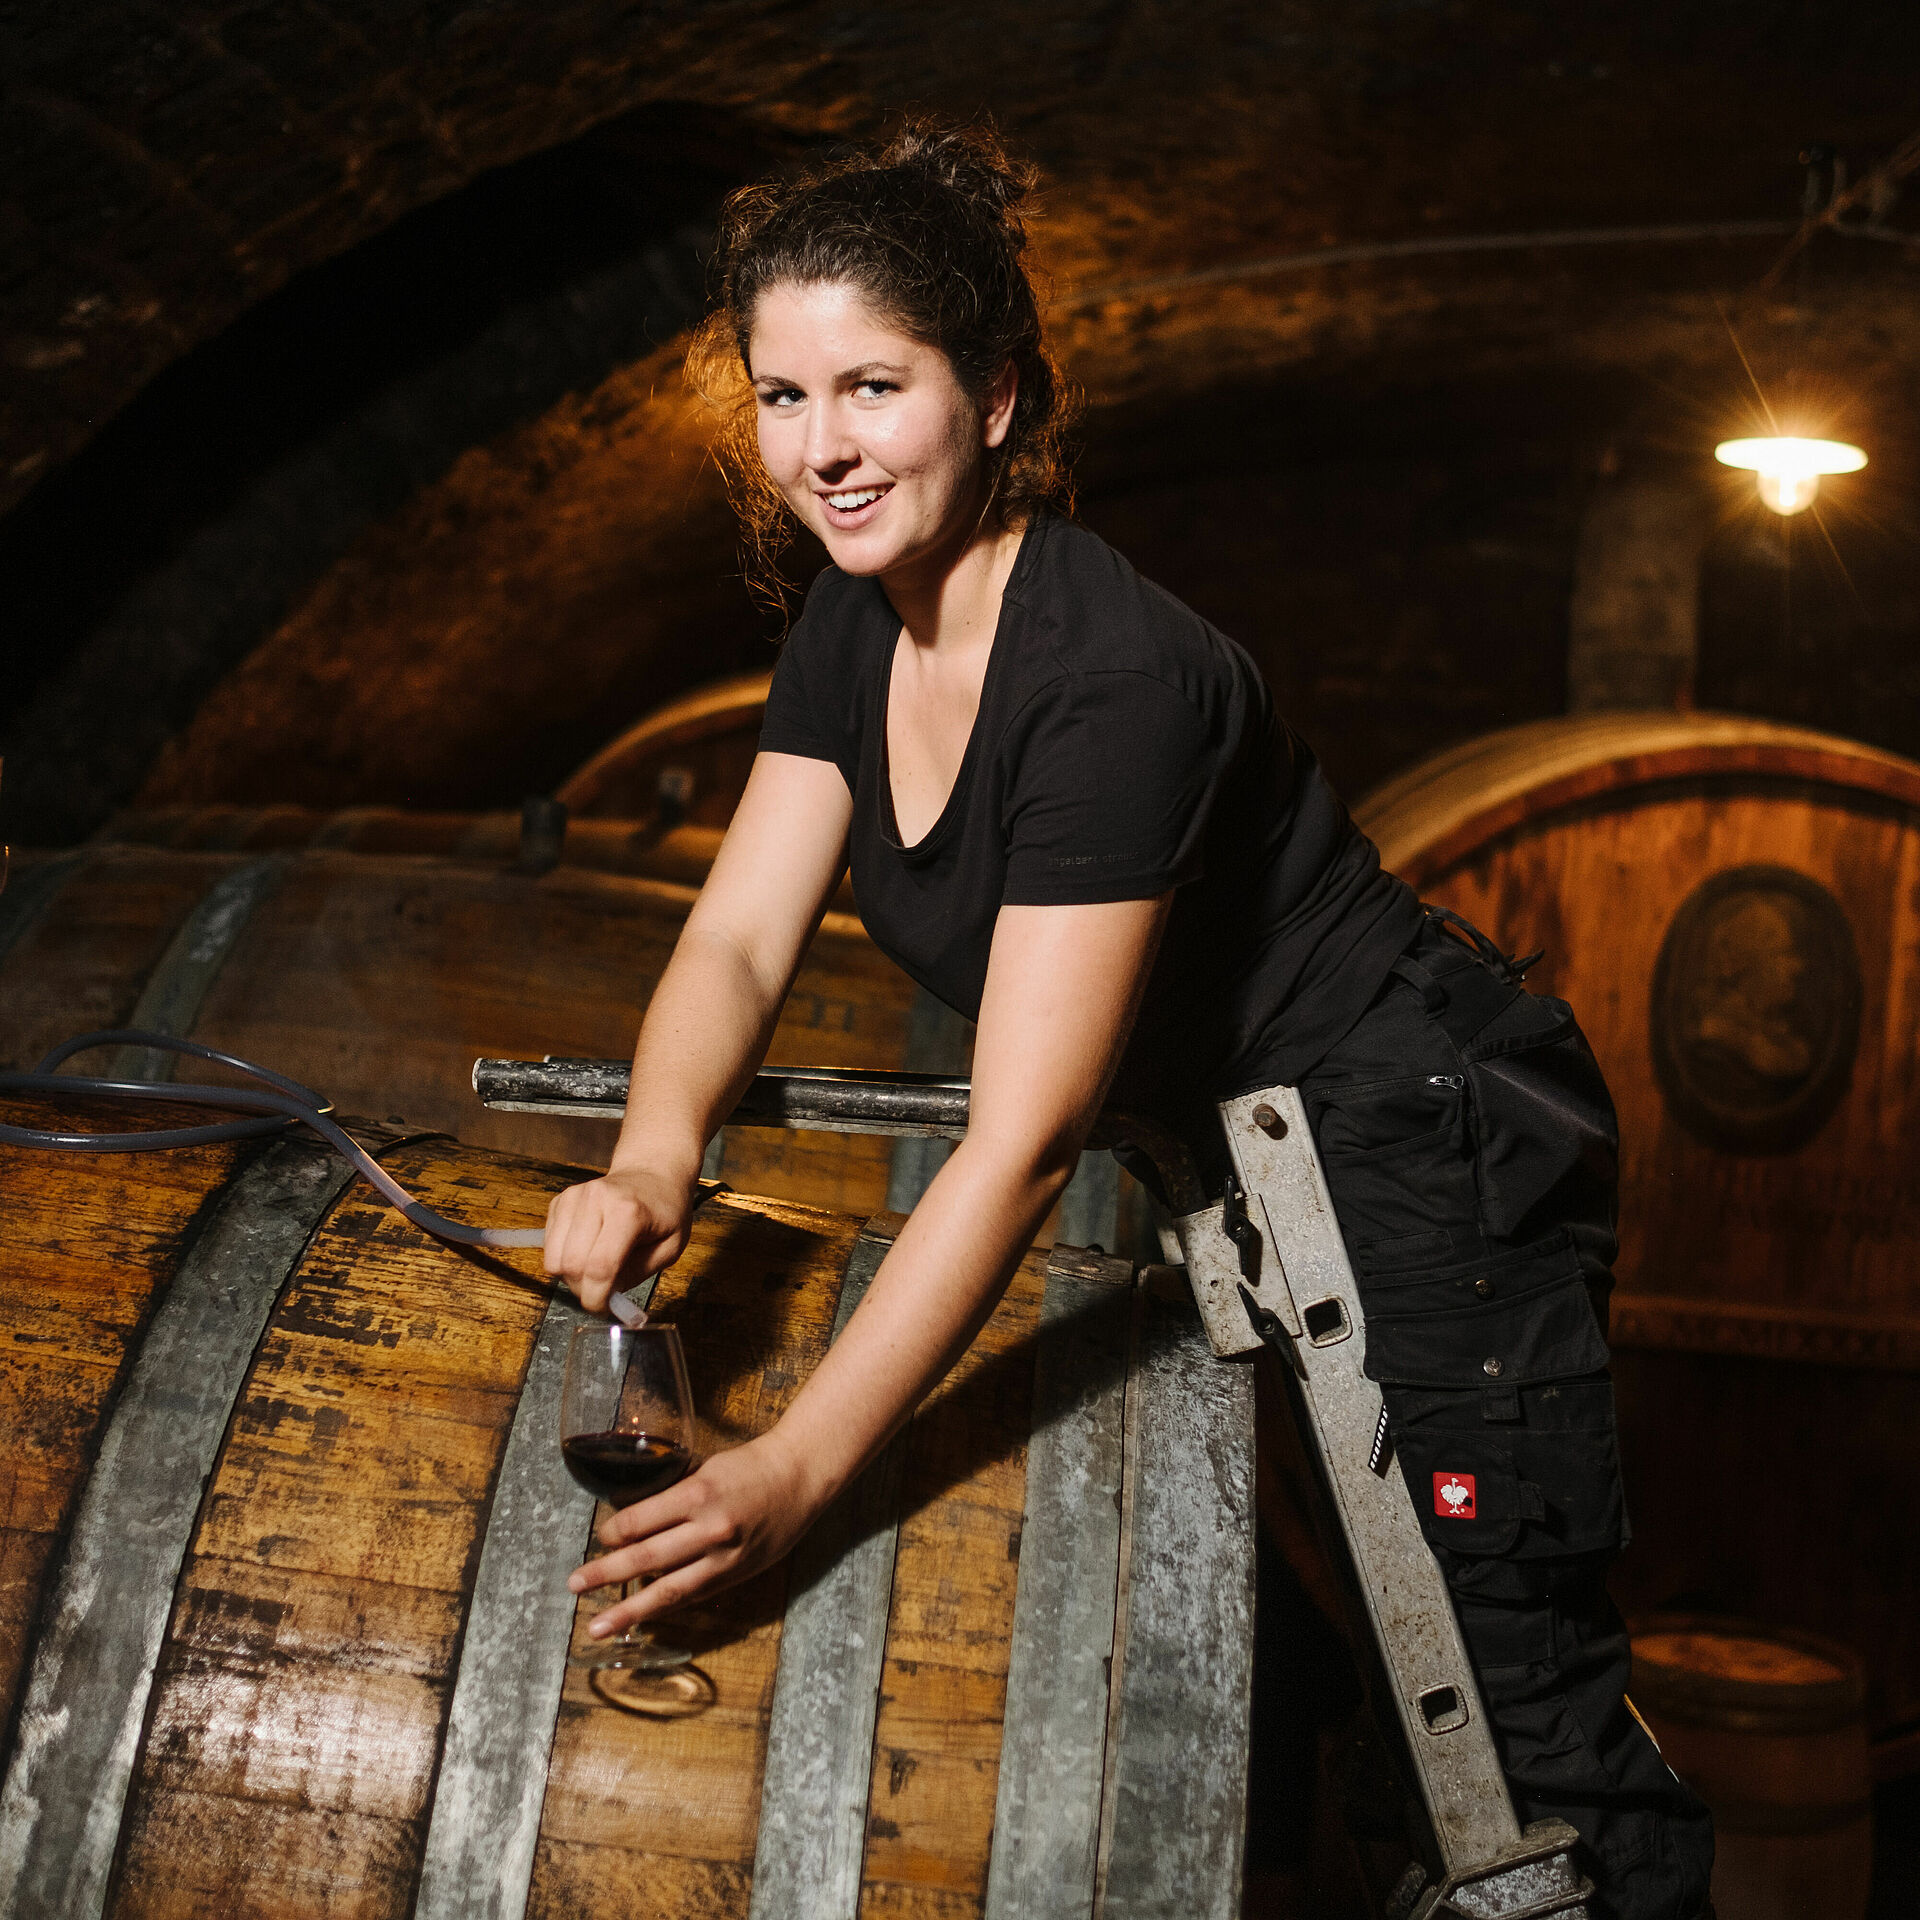 Viticulture student sampling a red wine in the barrique cellar of her partner winery in Neustadt